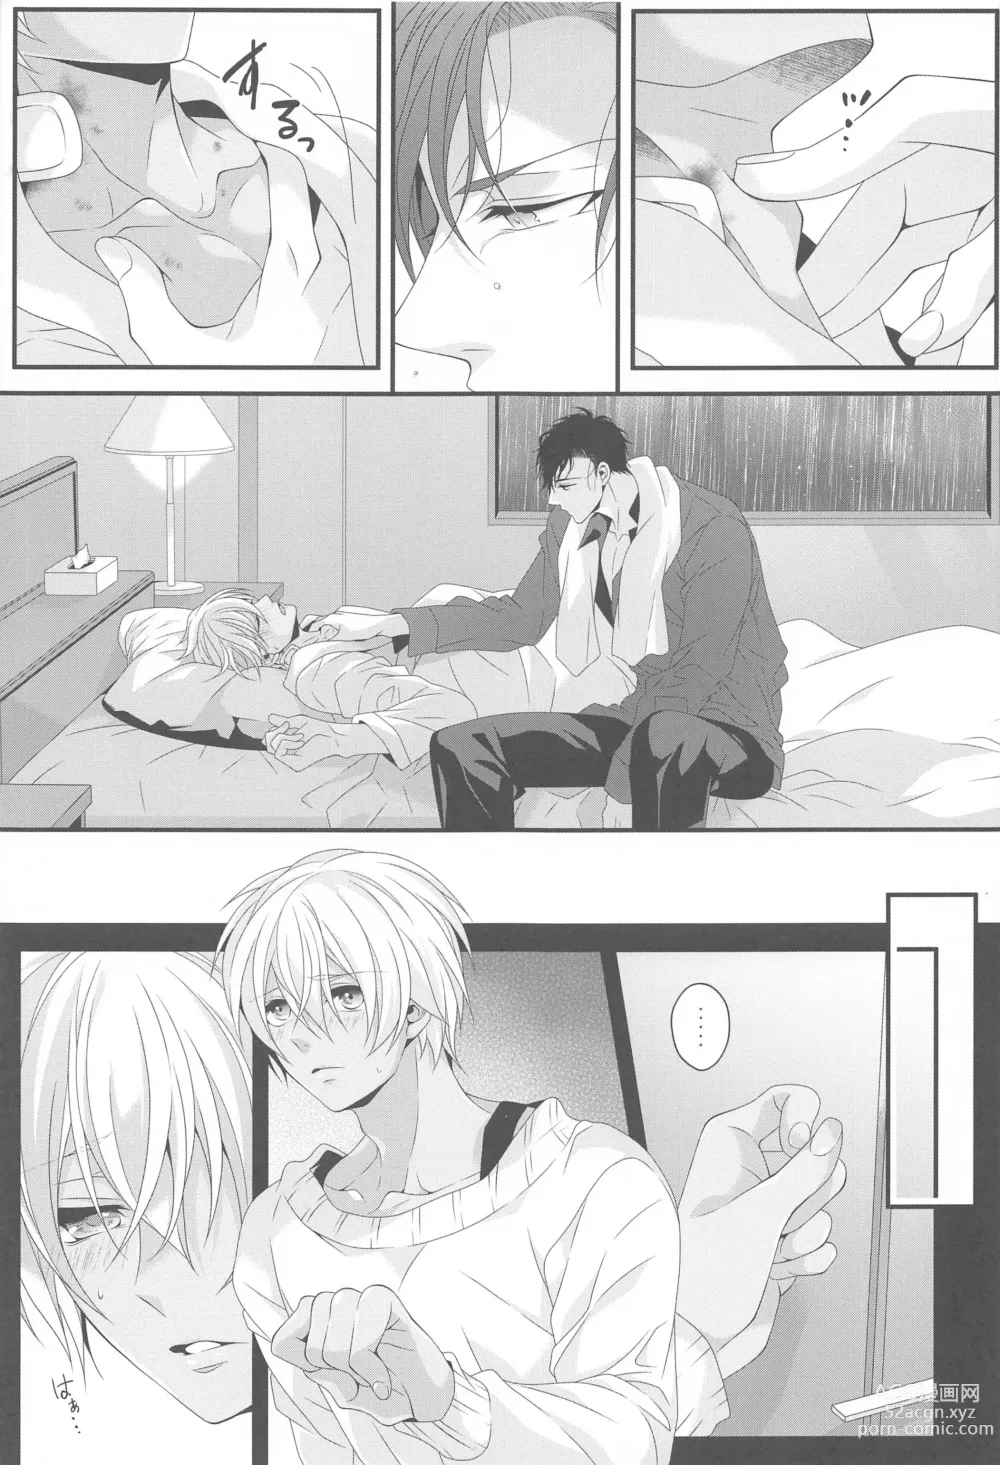 Page 10 of doujinshi Aibetsuriku no Yosame - A rainy night the pain of separation from loved ones